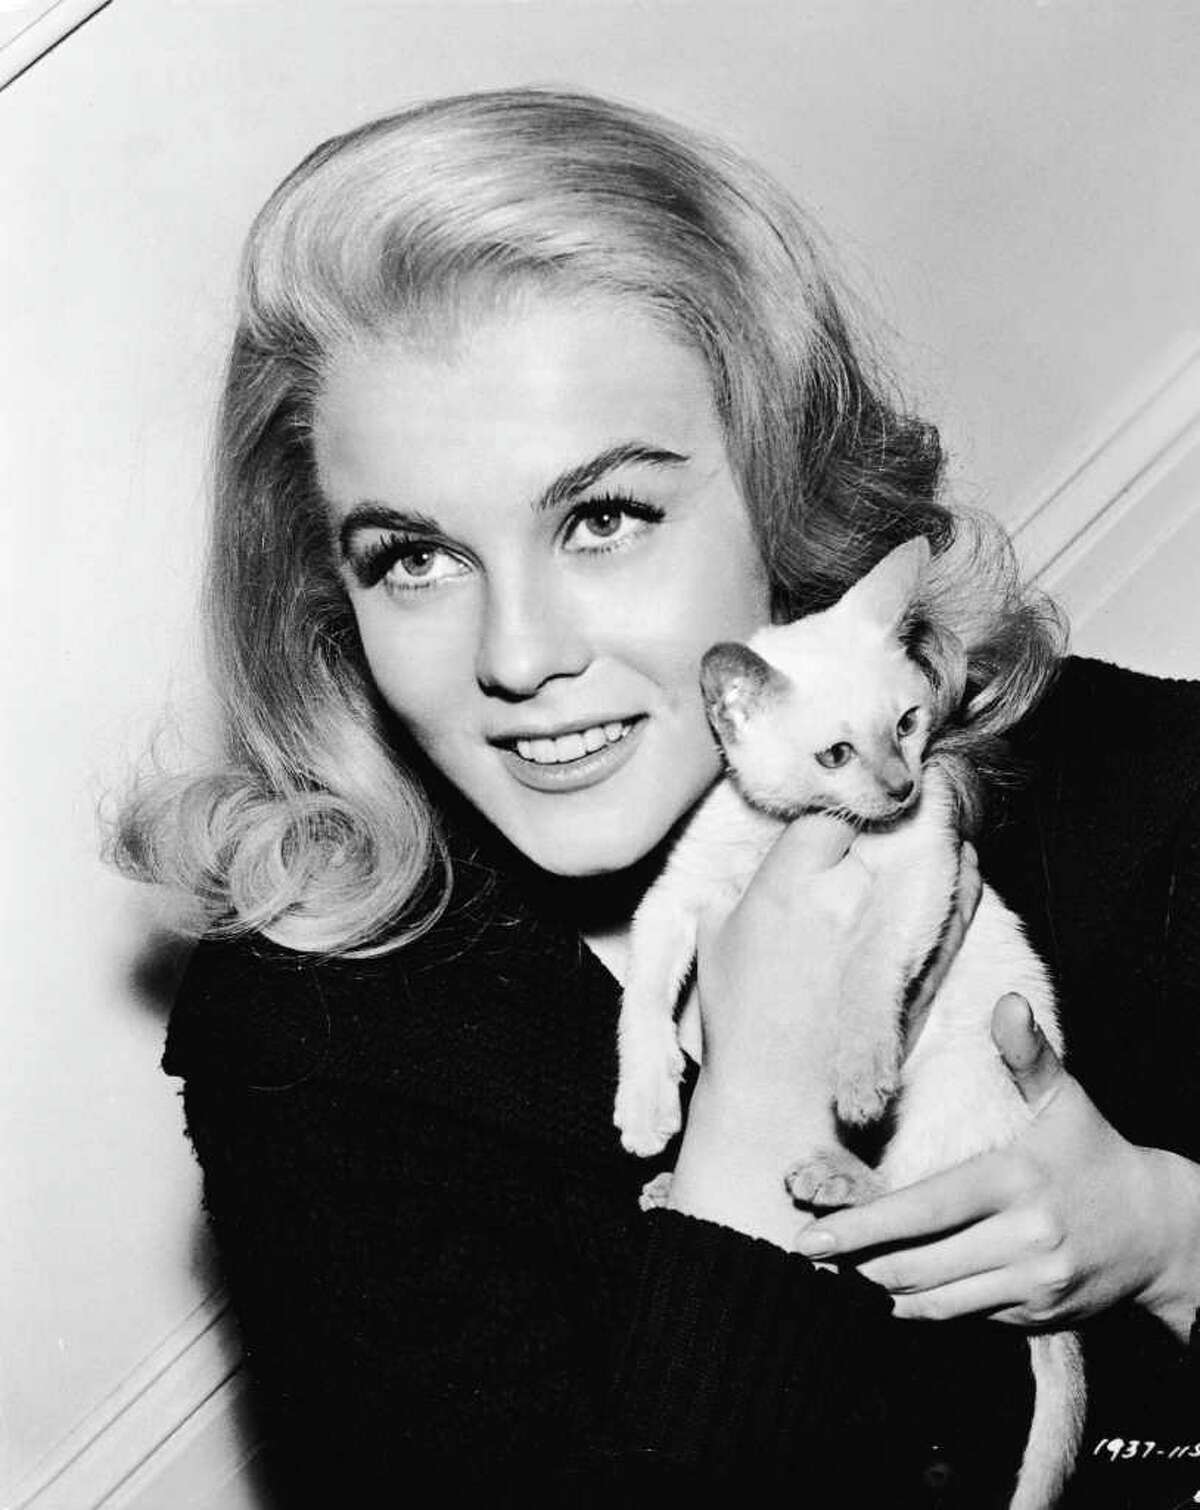 Promotional portrait of Swedish born actor Ann-Margret holding a Siamese kitten for the film, 'Kitten With a Whip,' 1964.